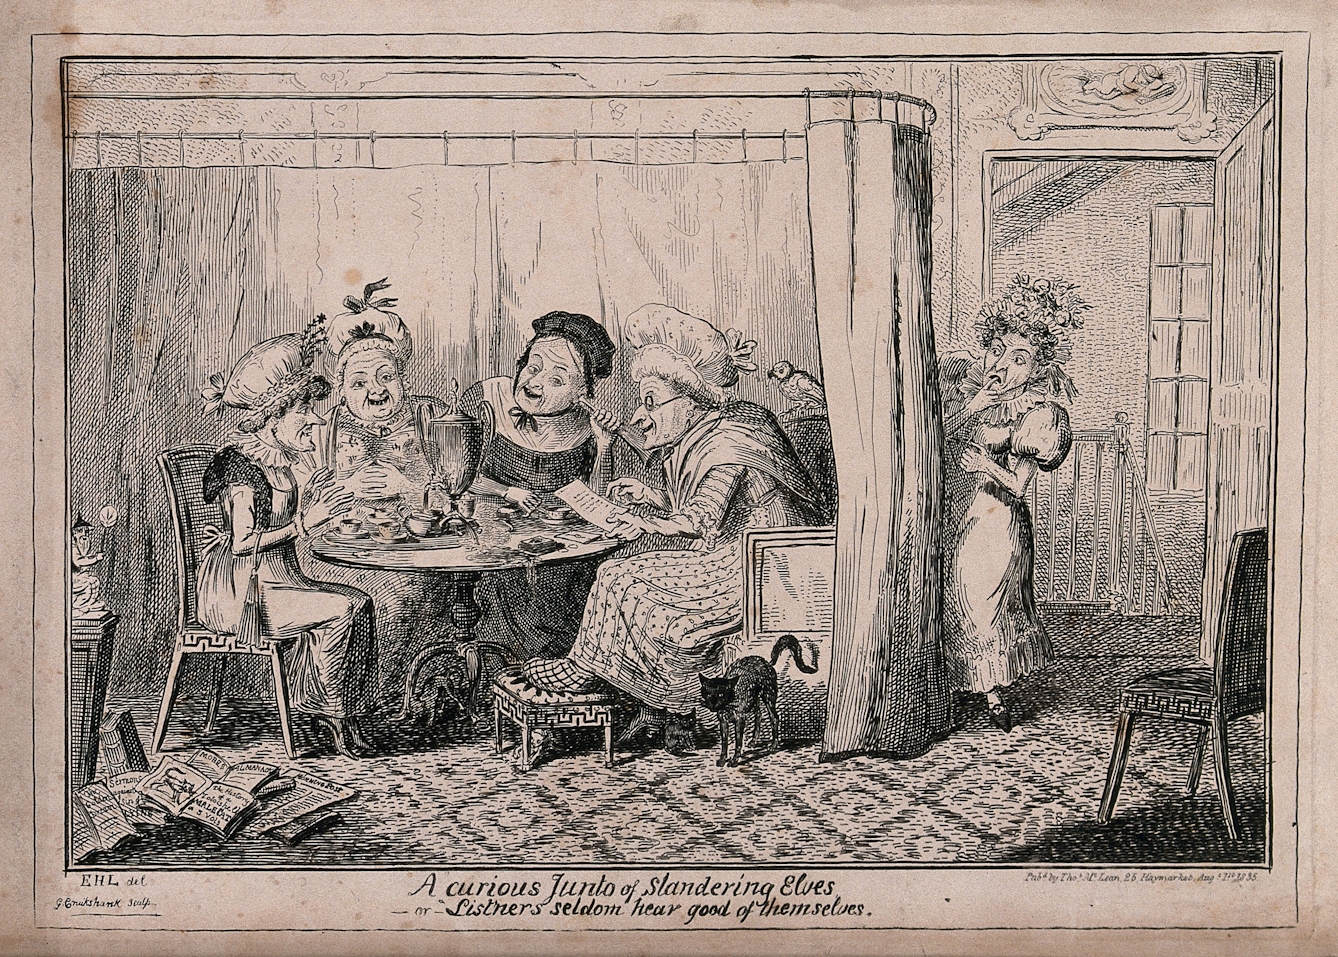 Black and white illustration showing four women sitting around a table, talking and drinking tea. Another woman eavesdrops.